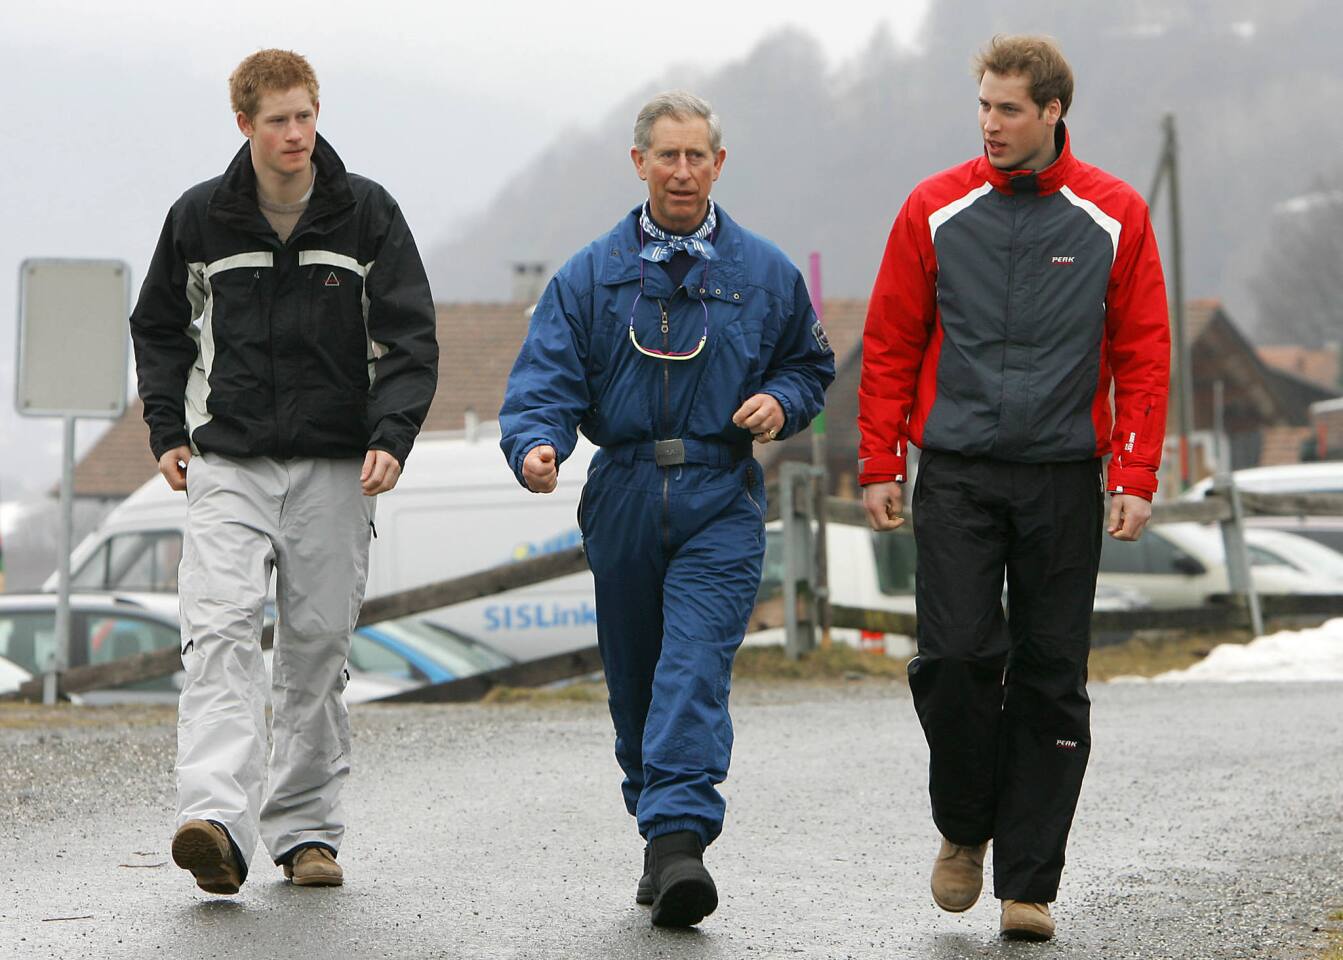 Britain's Prince Charles poses with Prince Williams and Prince Harry